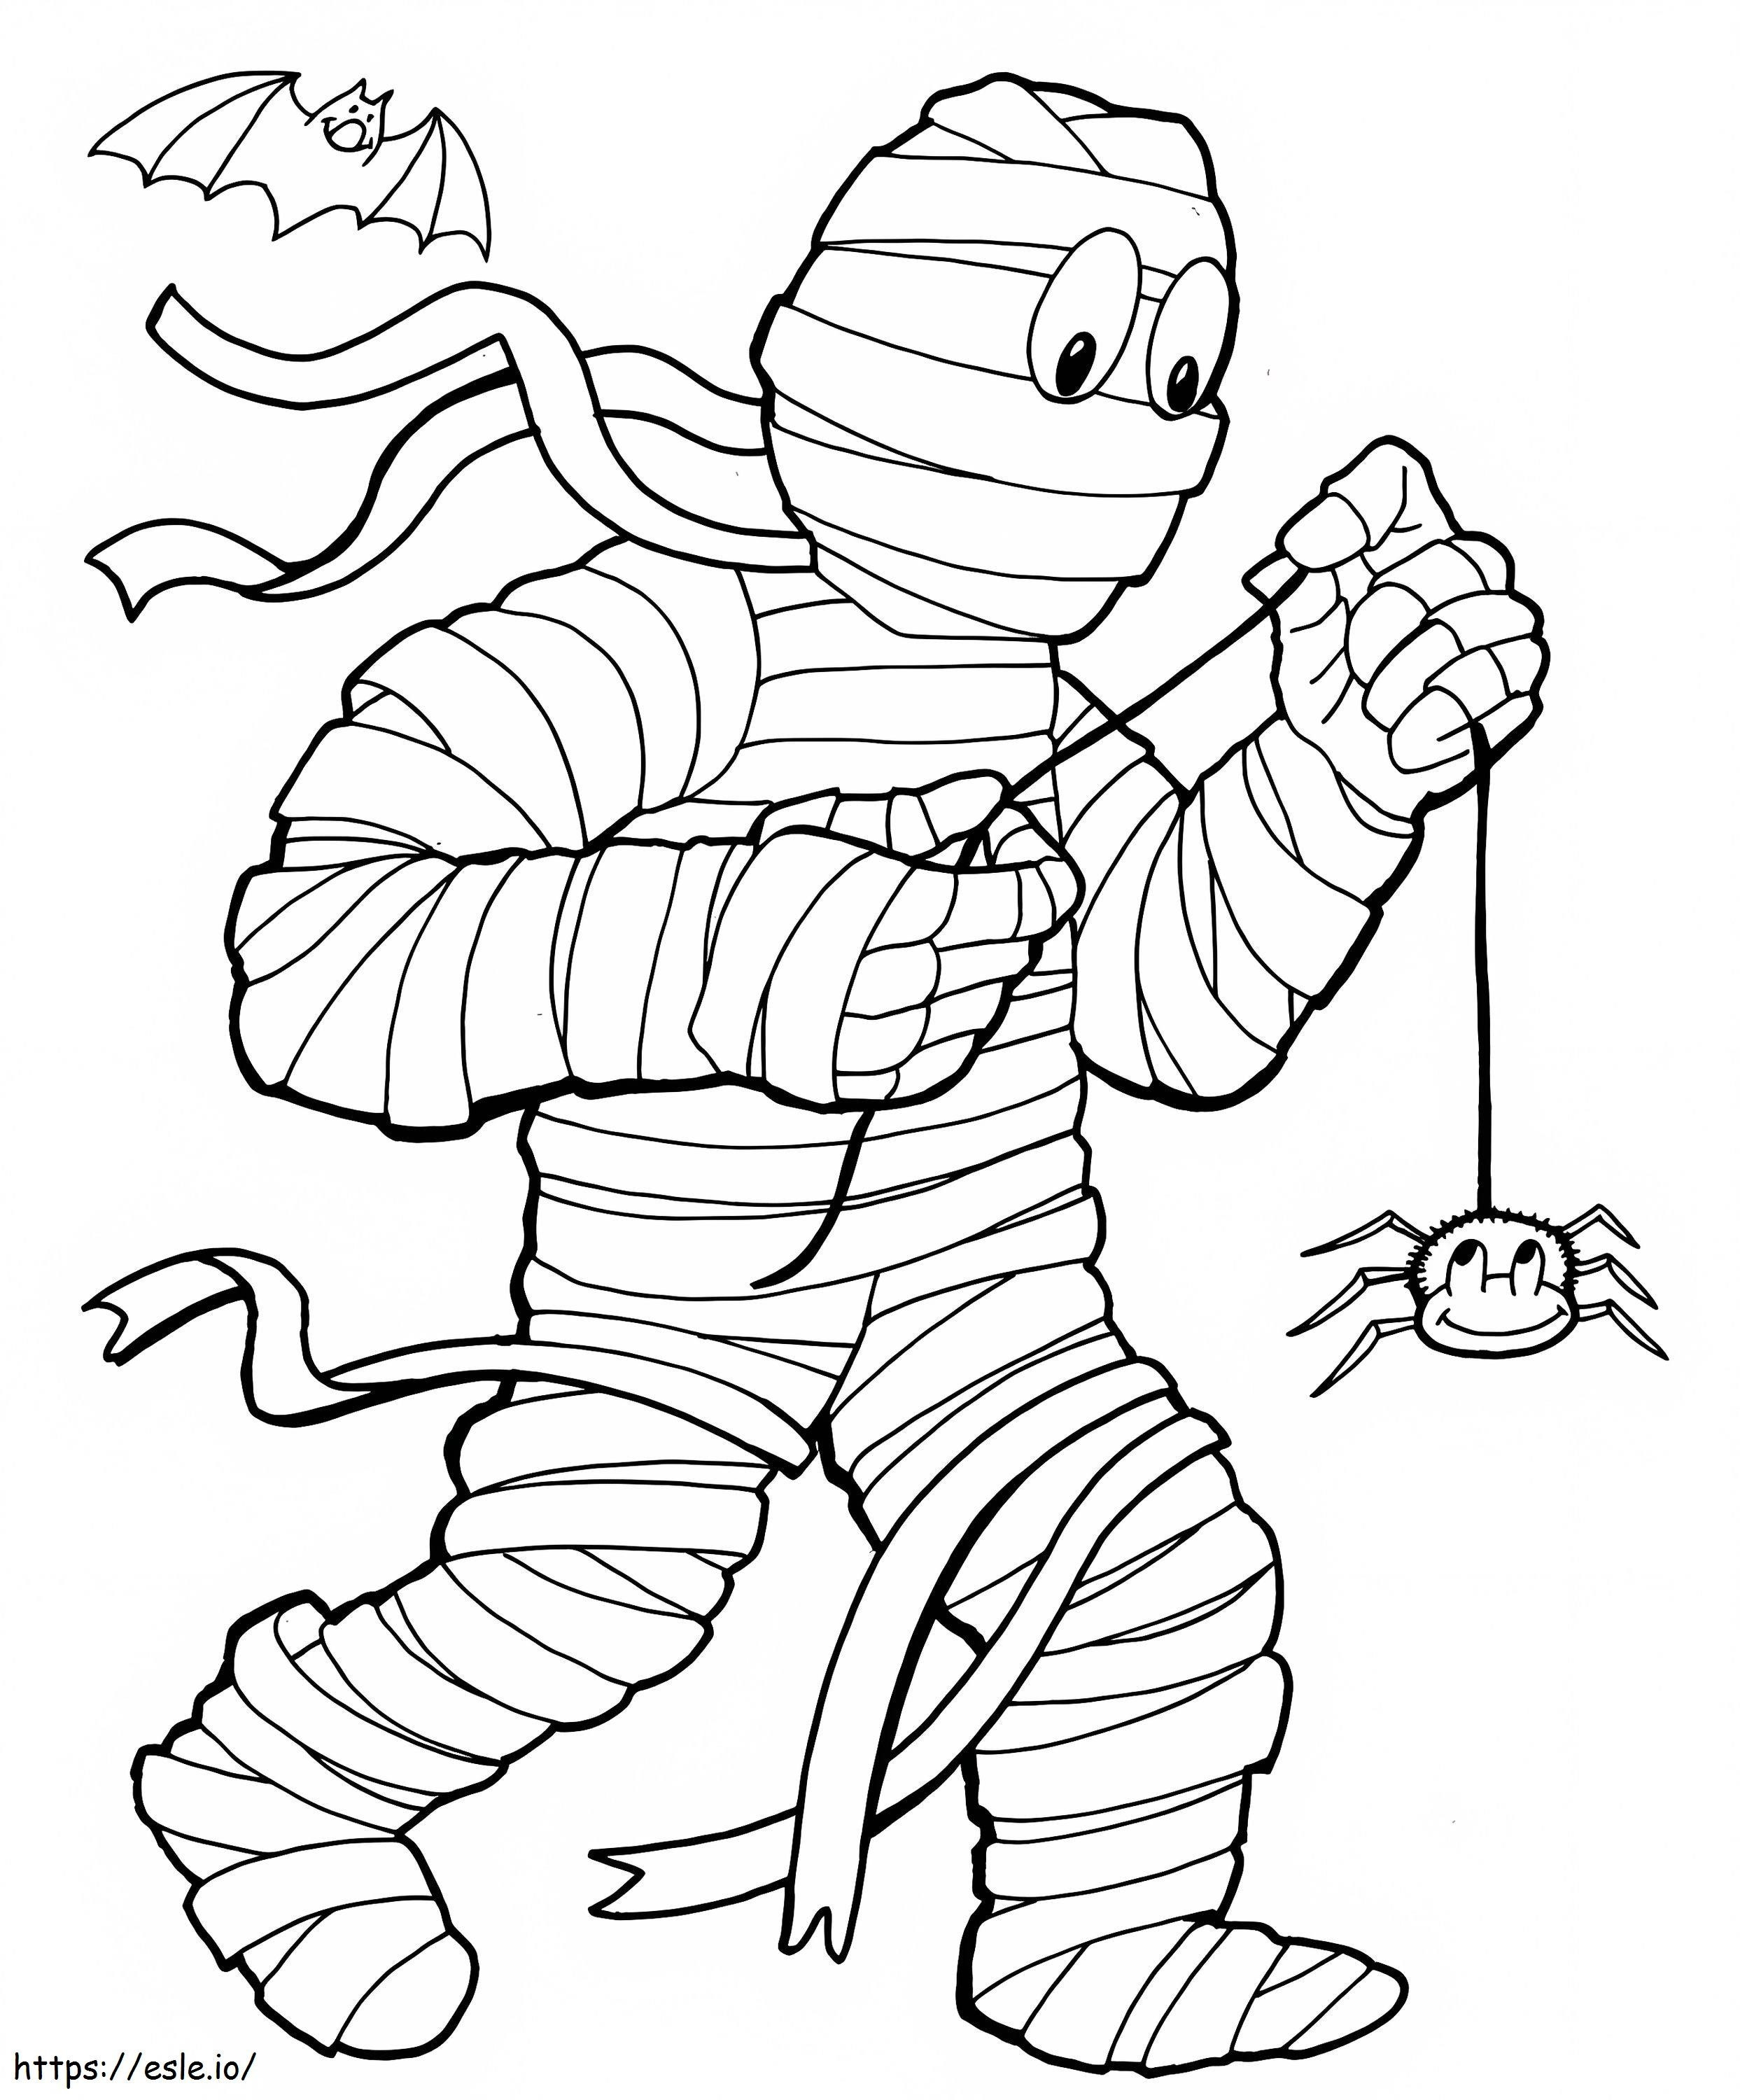 Funny Mummy Coloring Page coloring page